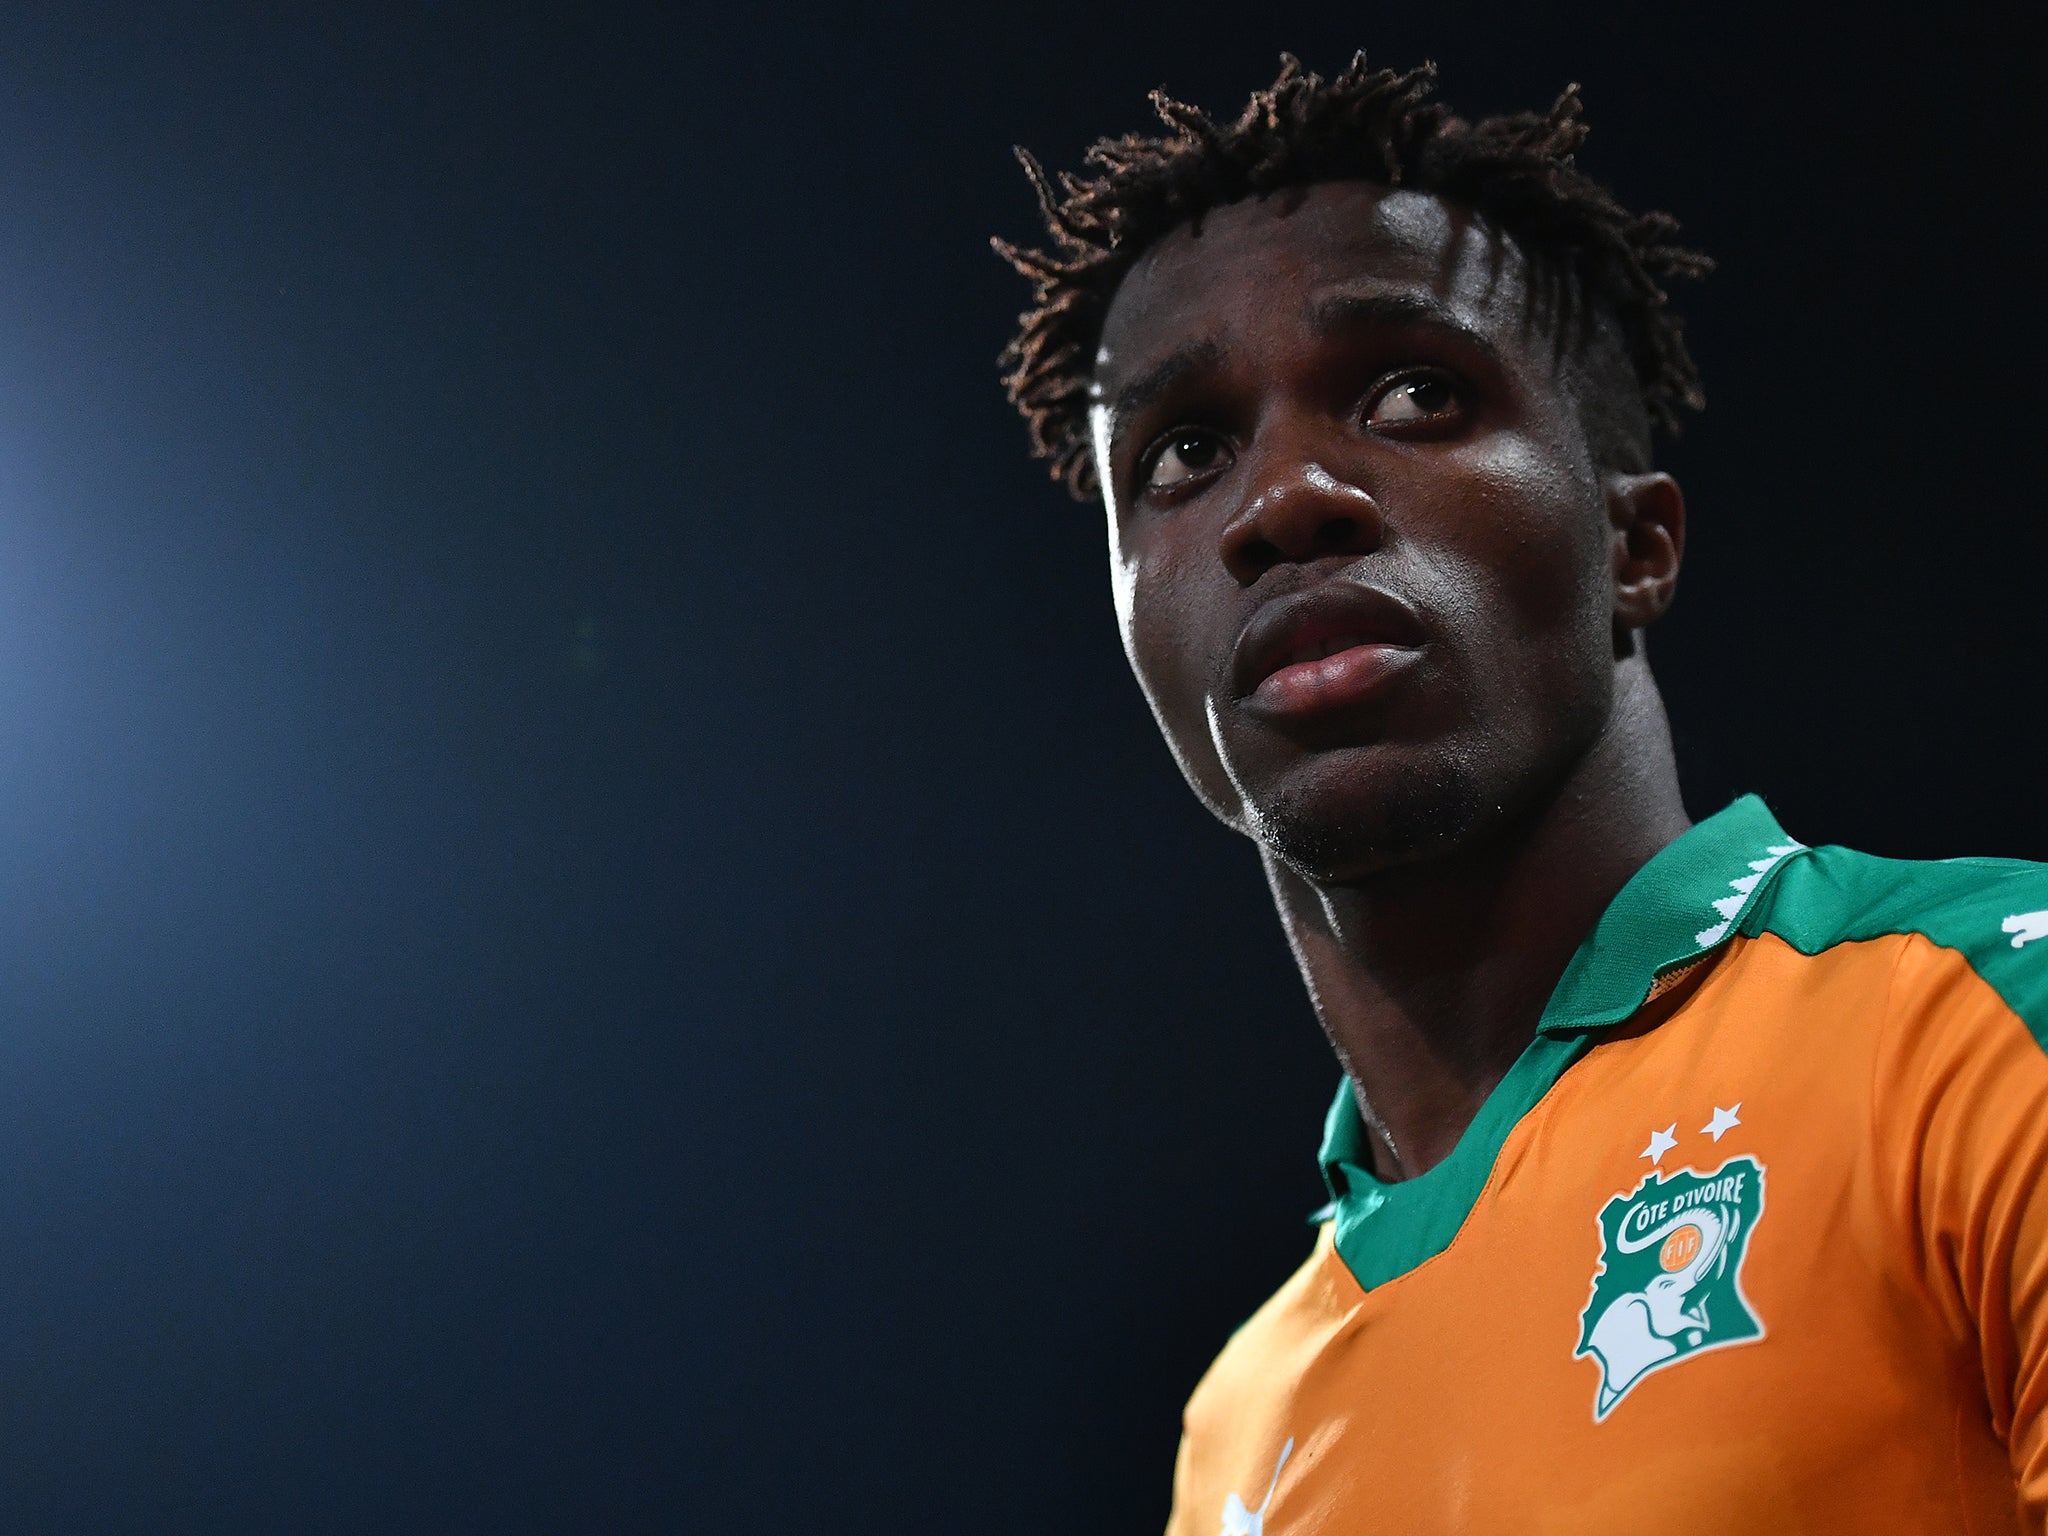 What is easy about Zaha playing for the Cote d’Ivoire, and not England?